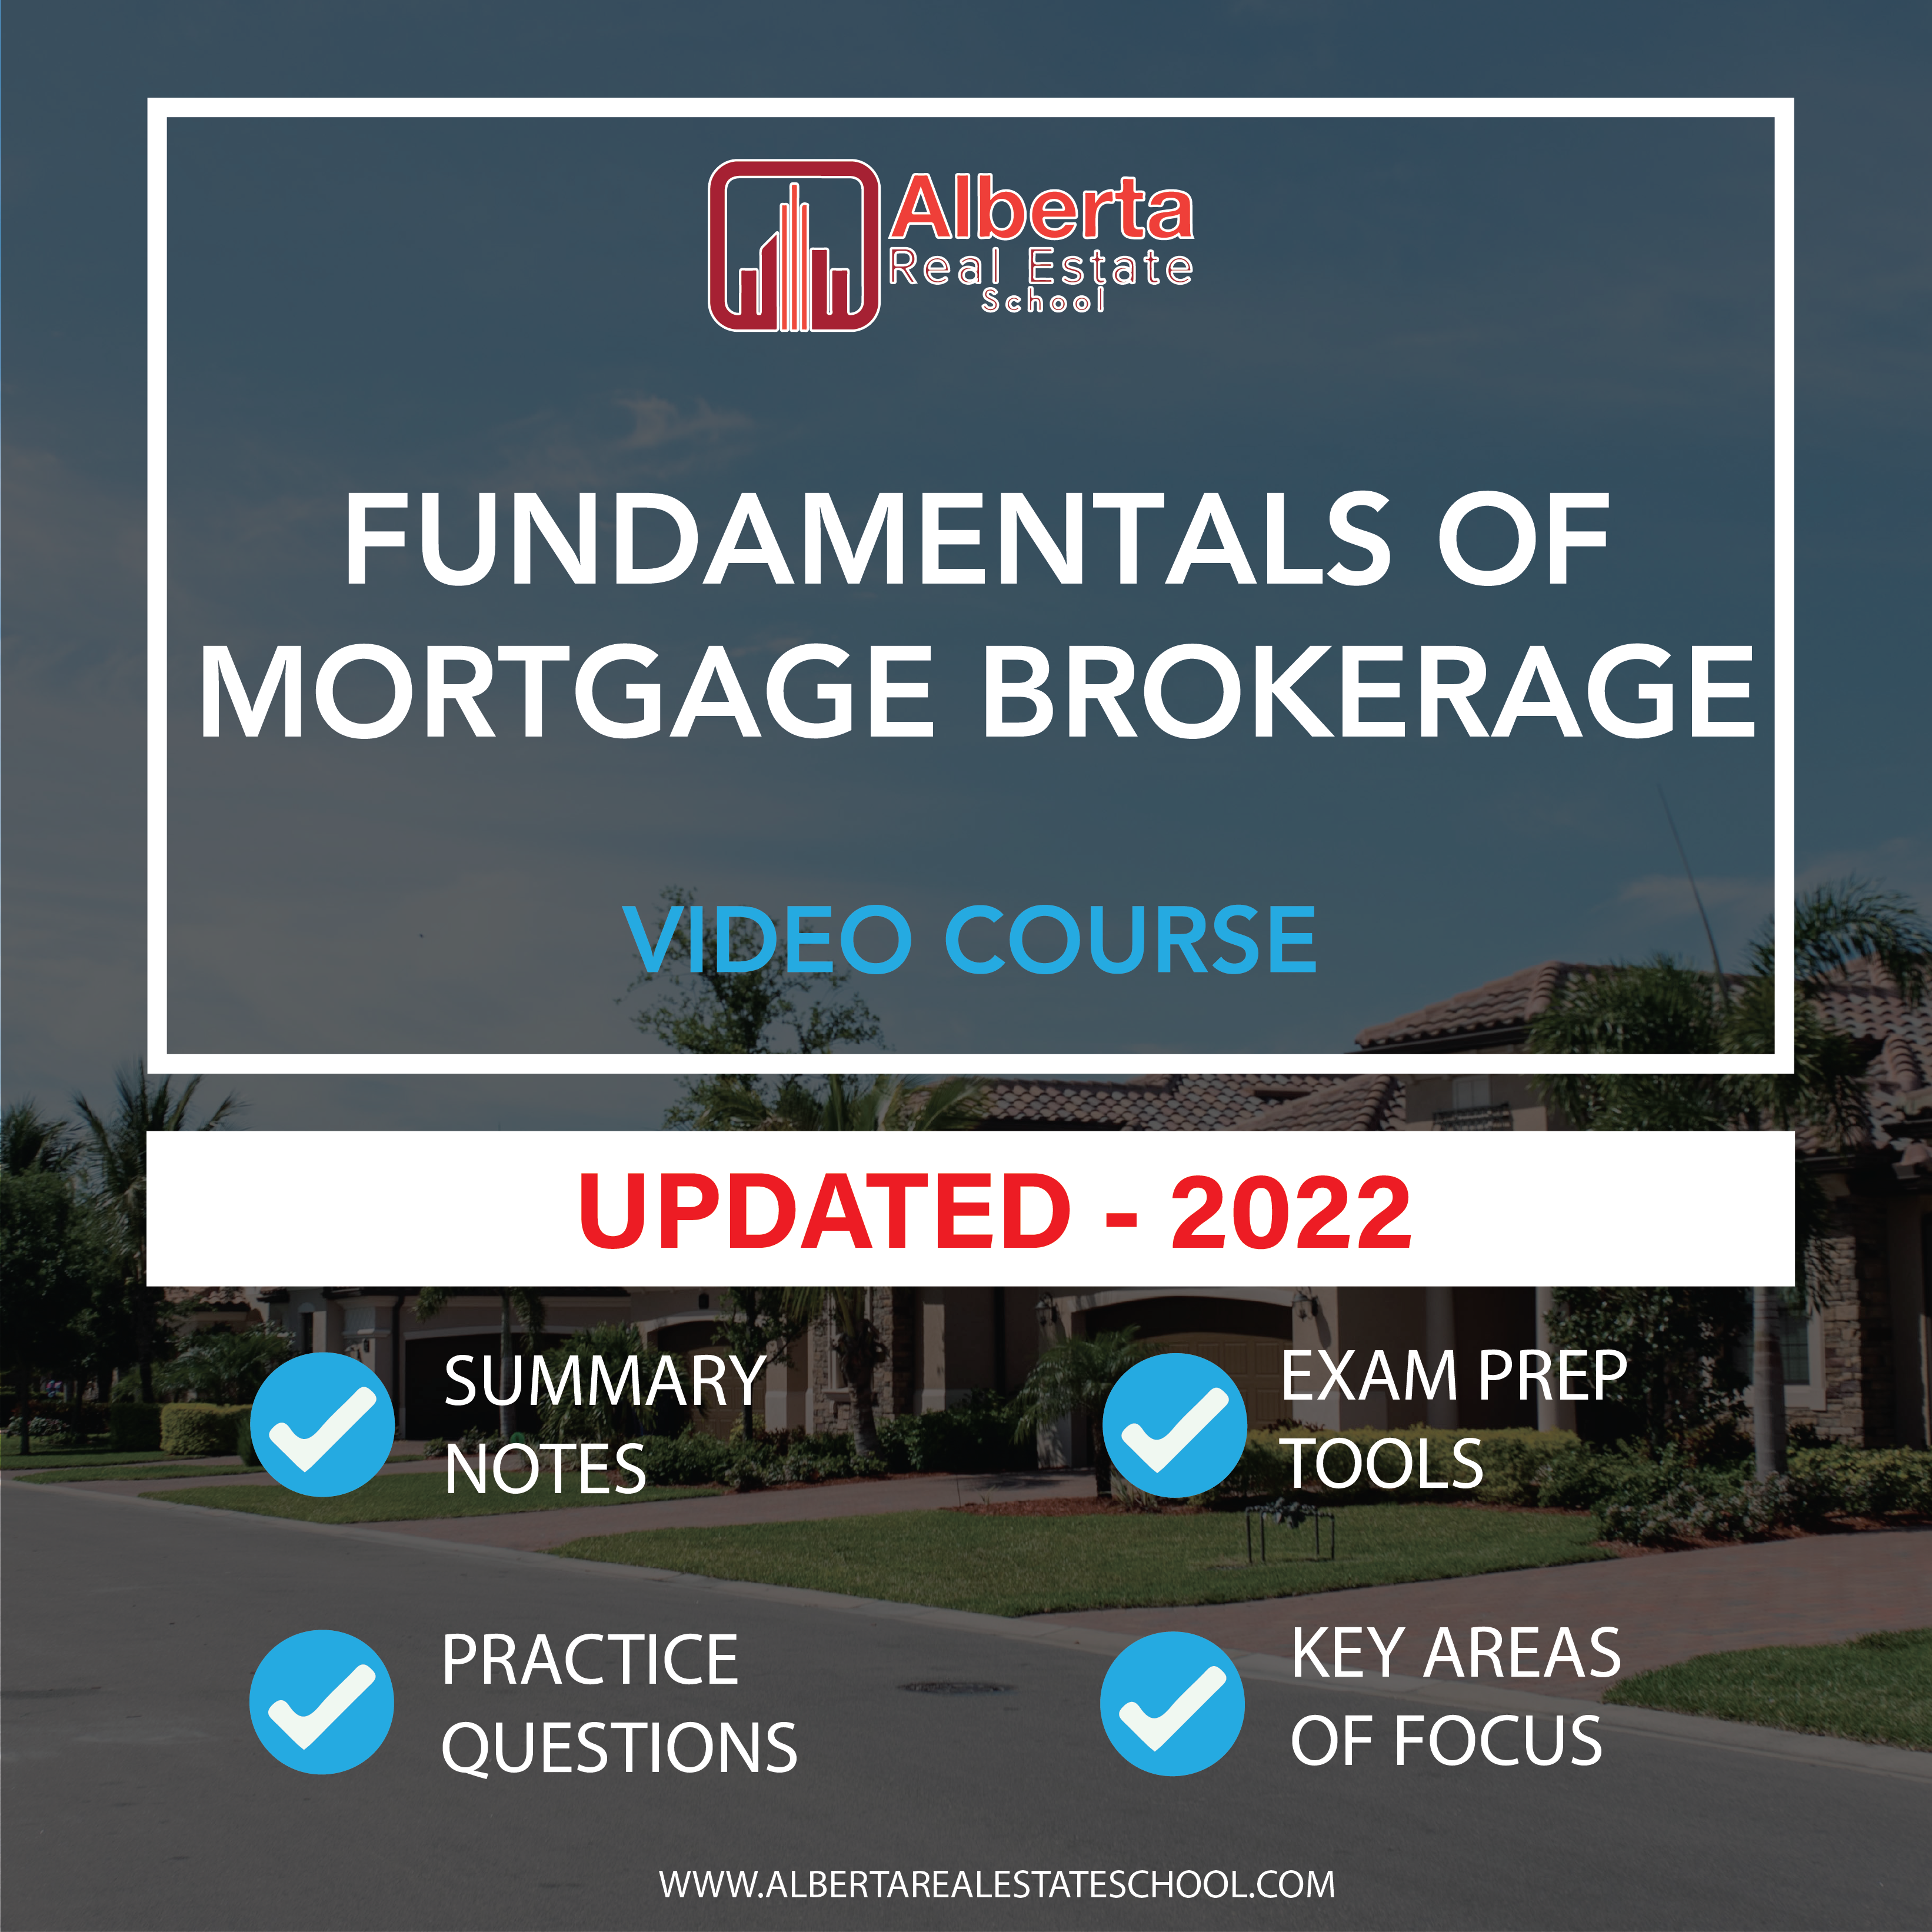 The image shows the title "Fundamentals of Mortgage Brokerage - Video Course" that refers to a product that offers video guides for the Fundamentals of Mortgage Brokerage Licensing Course in Alberta by Alberta Real Estate School.